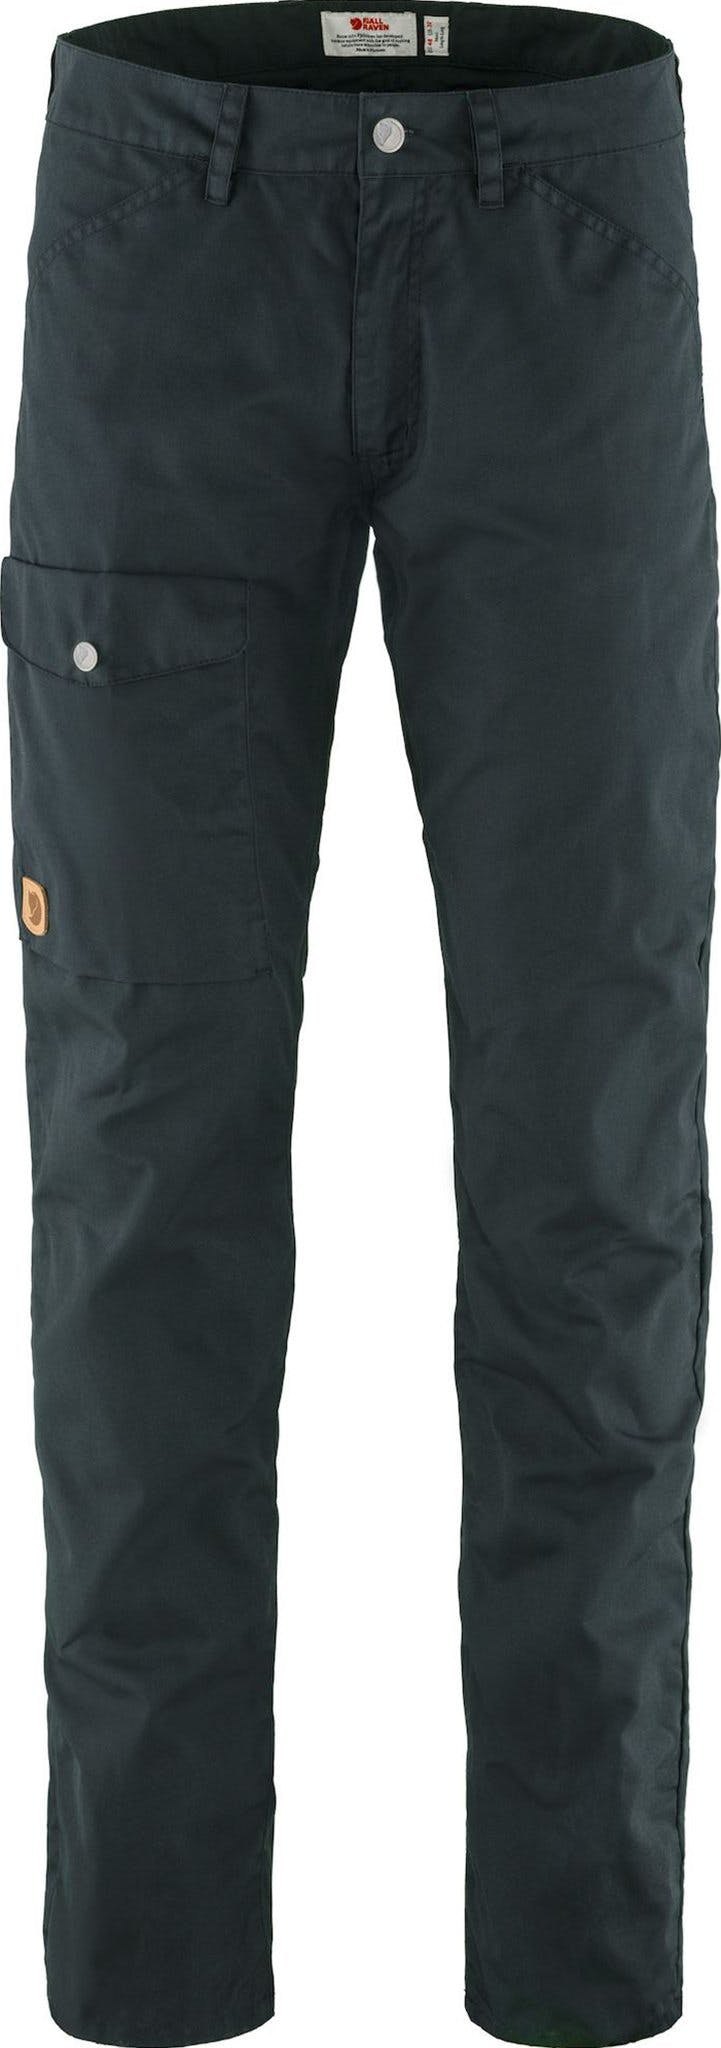 Product image for Greenland Long Jeans - Men's